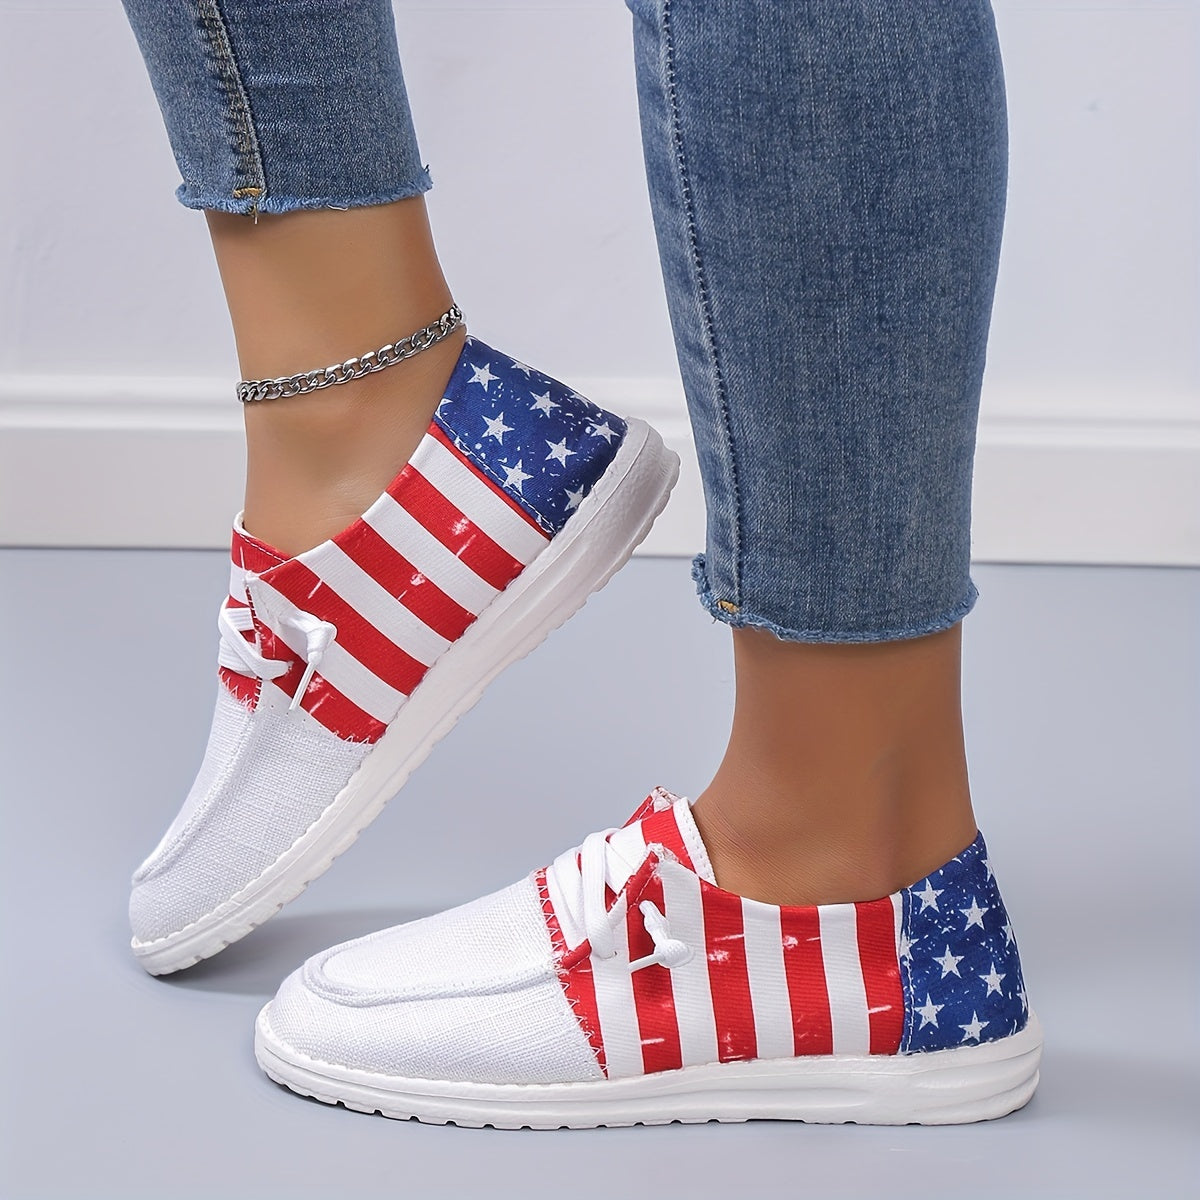 Women's Flag Pattern Canvas Shoes, Lace Up Low Top Slip On Flat Sneakers, Casual Loafers For Independence Day